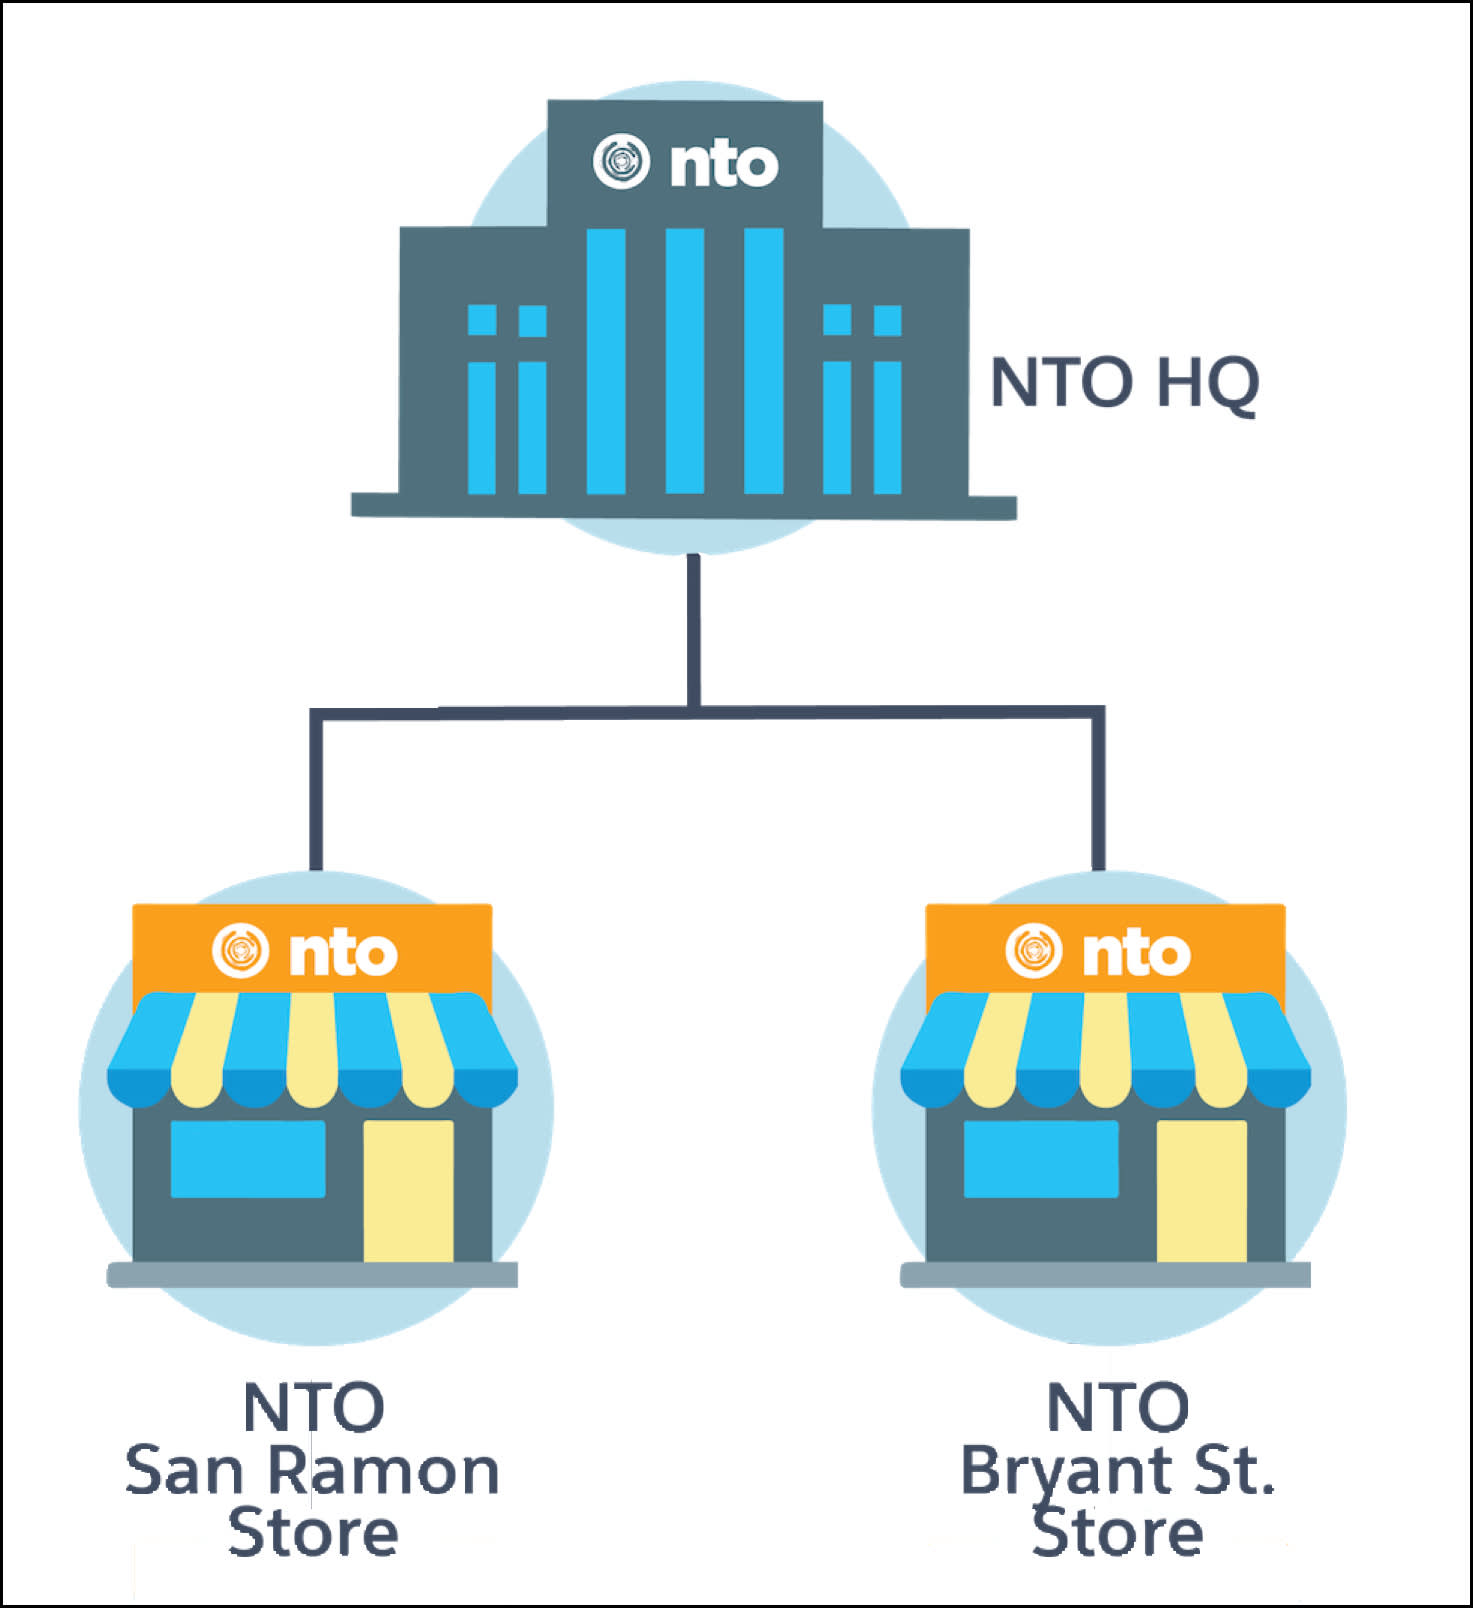 A hierarchy of NTO customer accounts such as the headquarter and the retail stores.